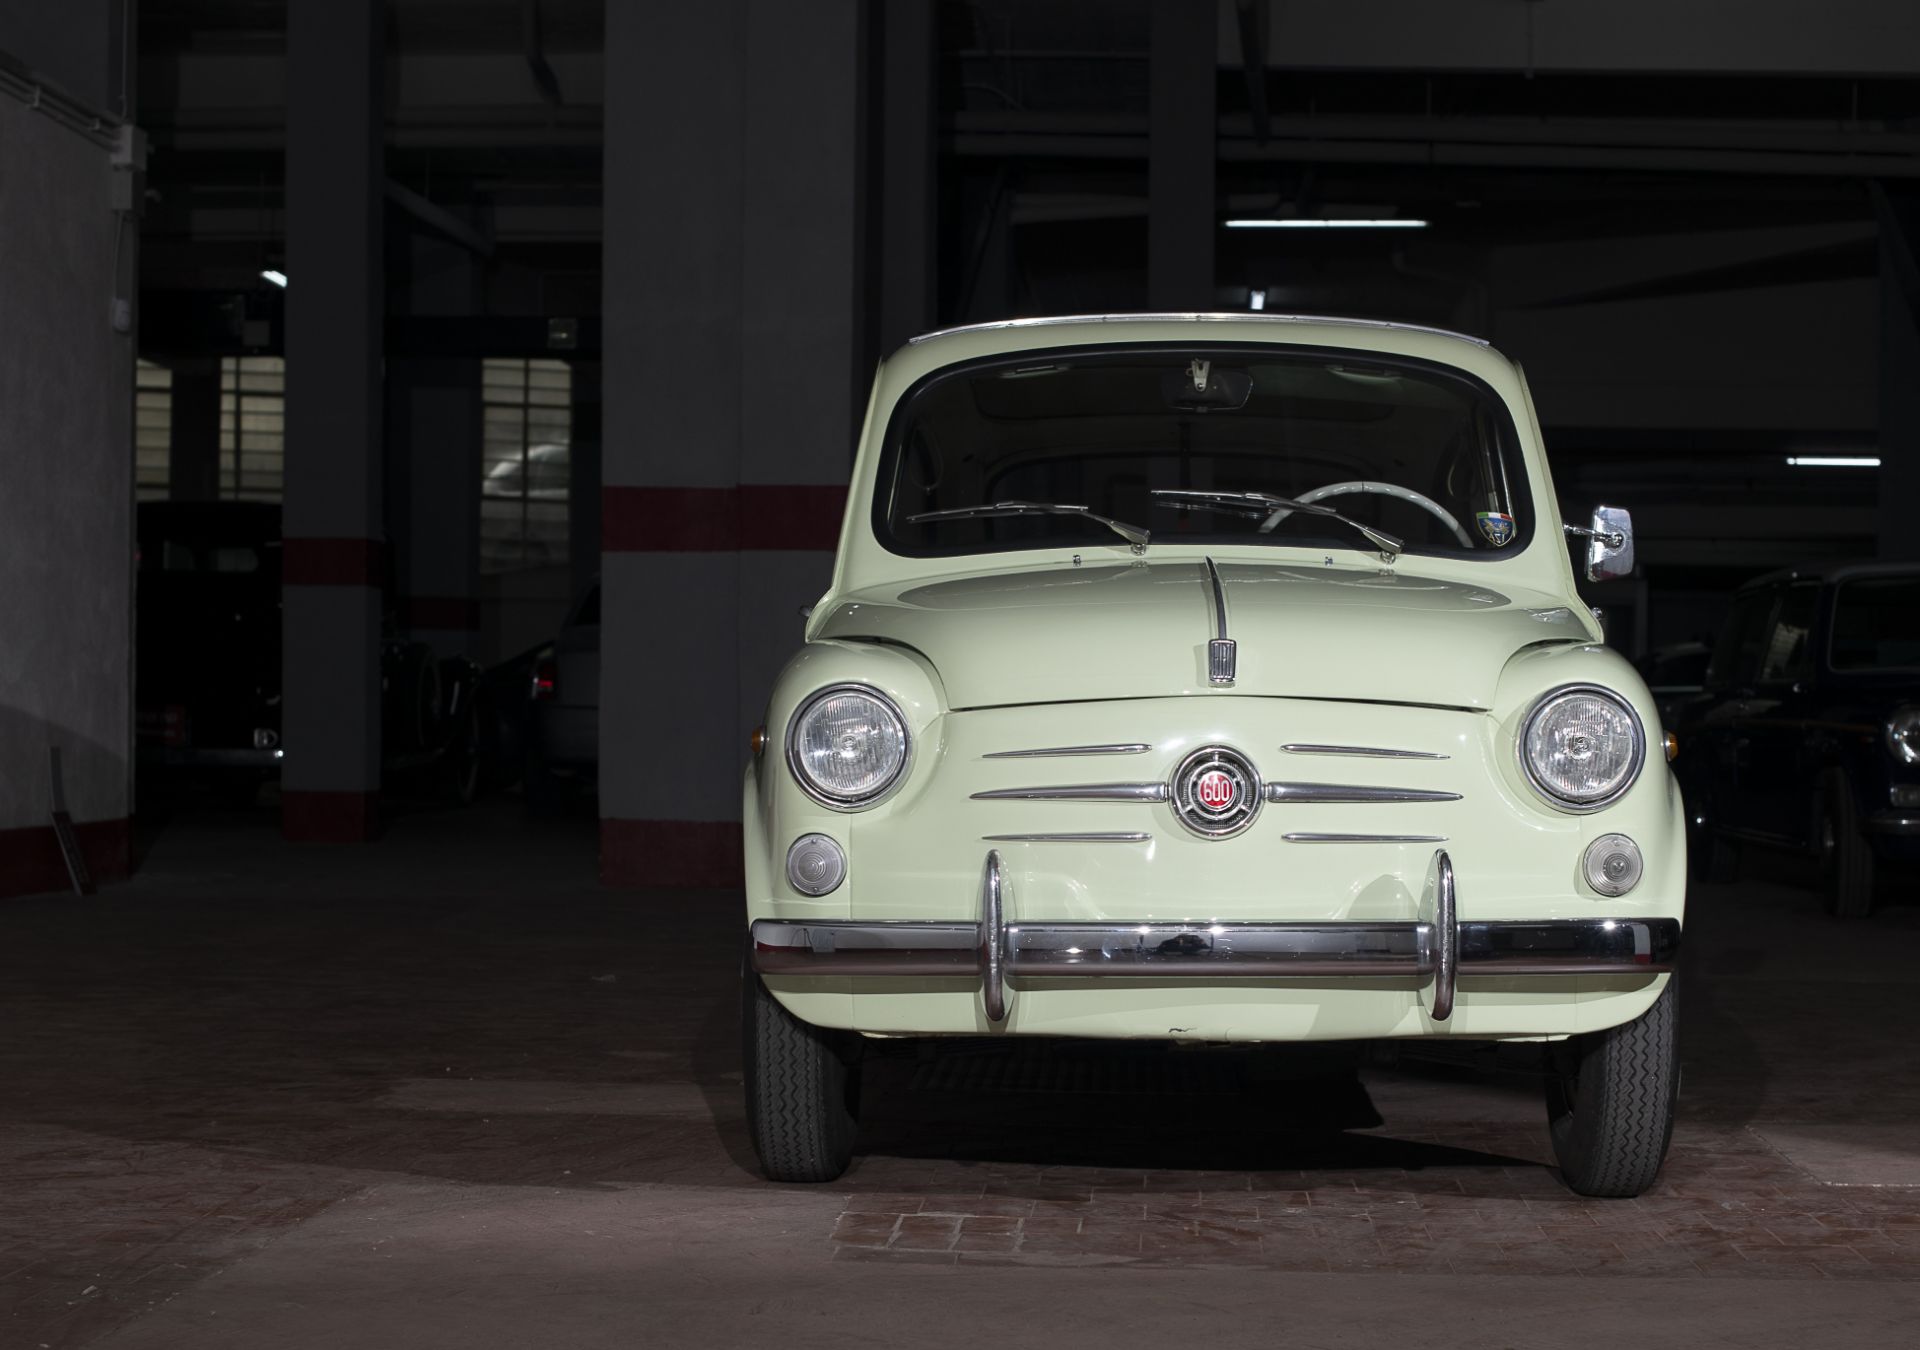 FIAT 600 CONVERTIBLE 1958 - Image 2 of 4